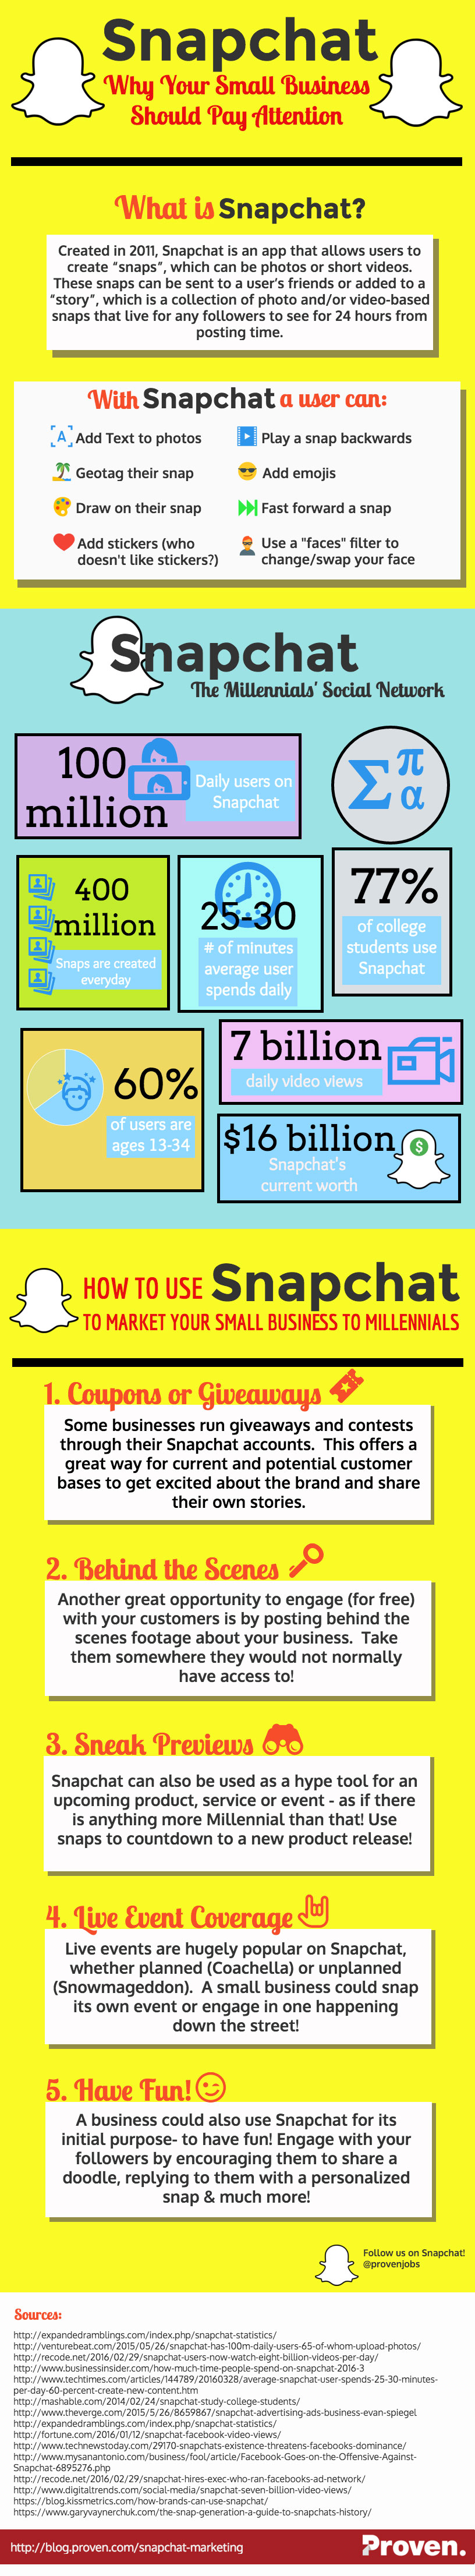 Snapchat marketing for small business - inforgraphic by Proven